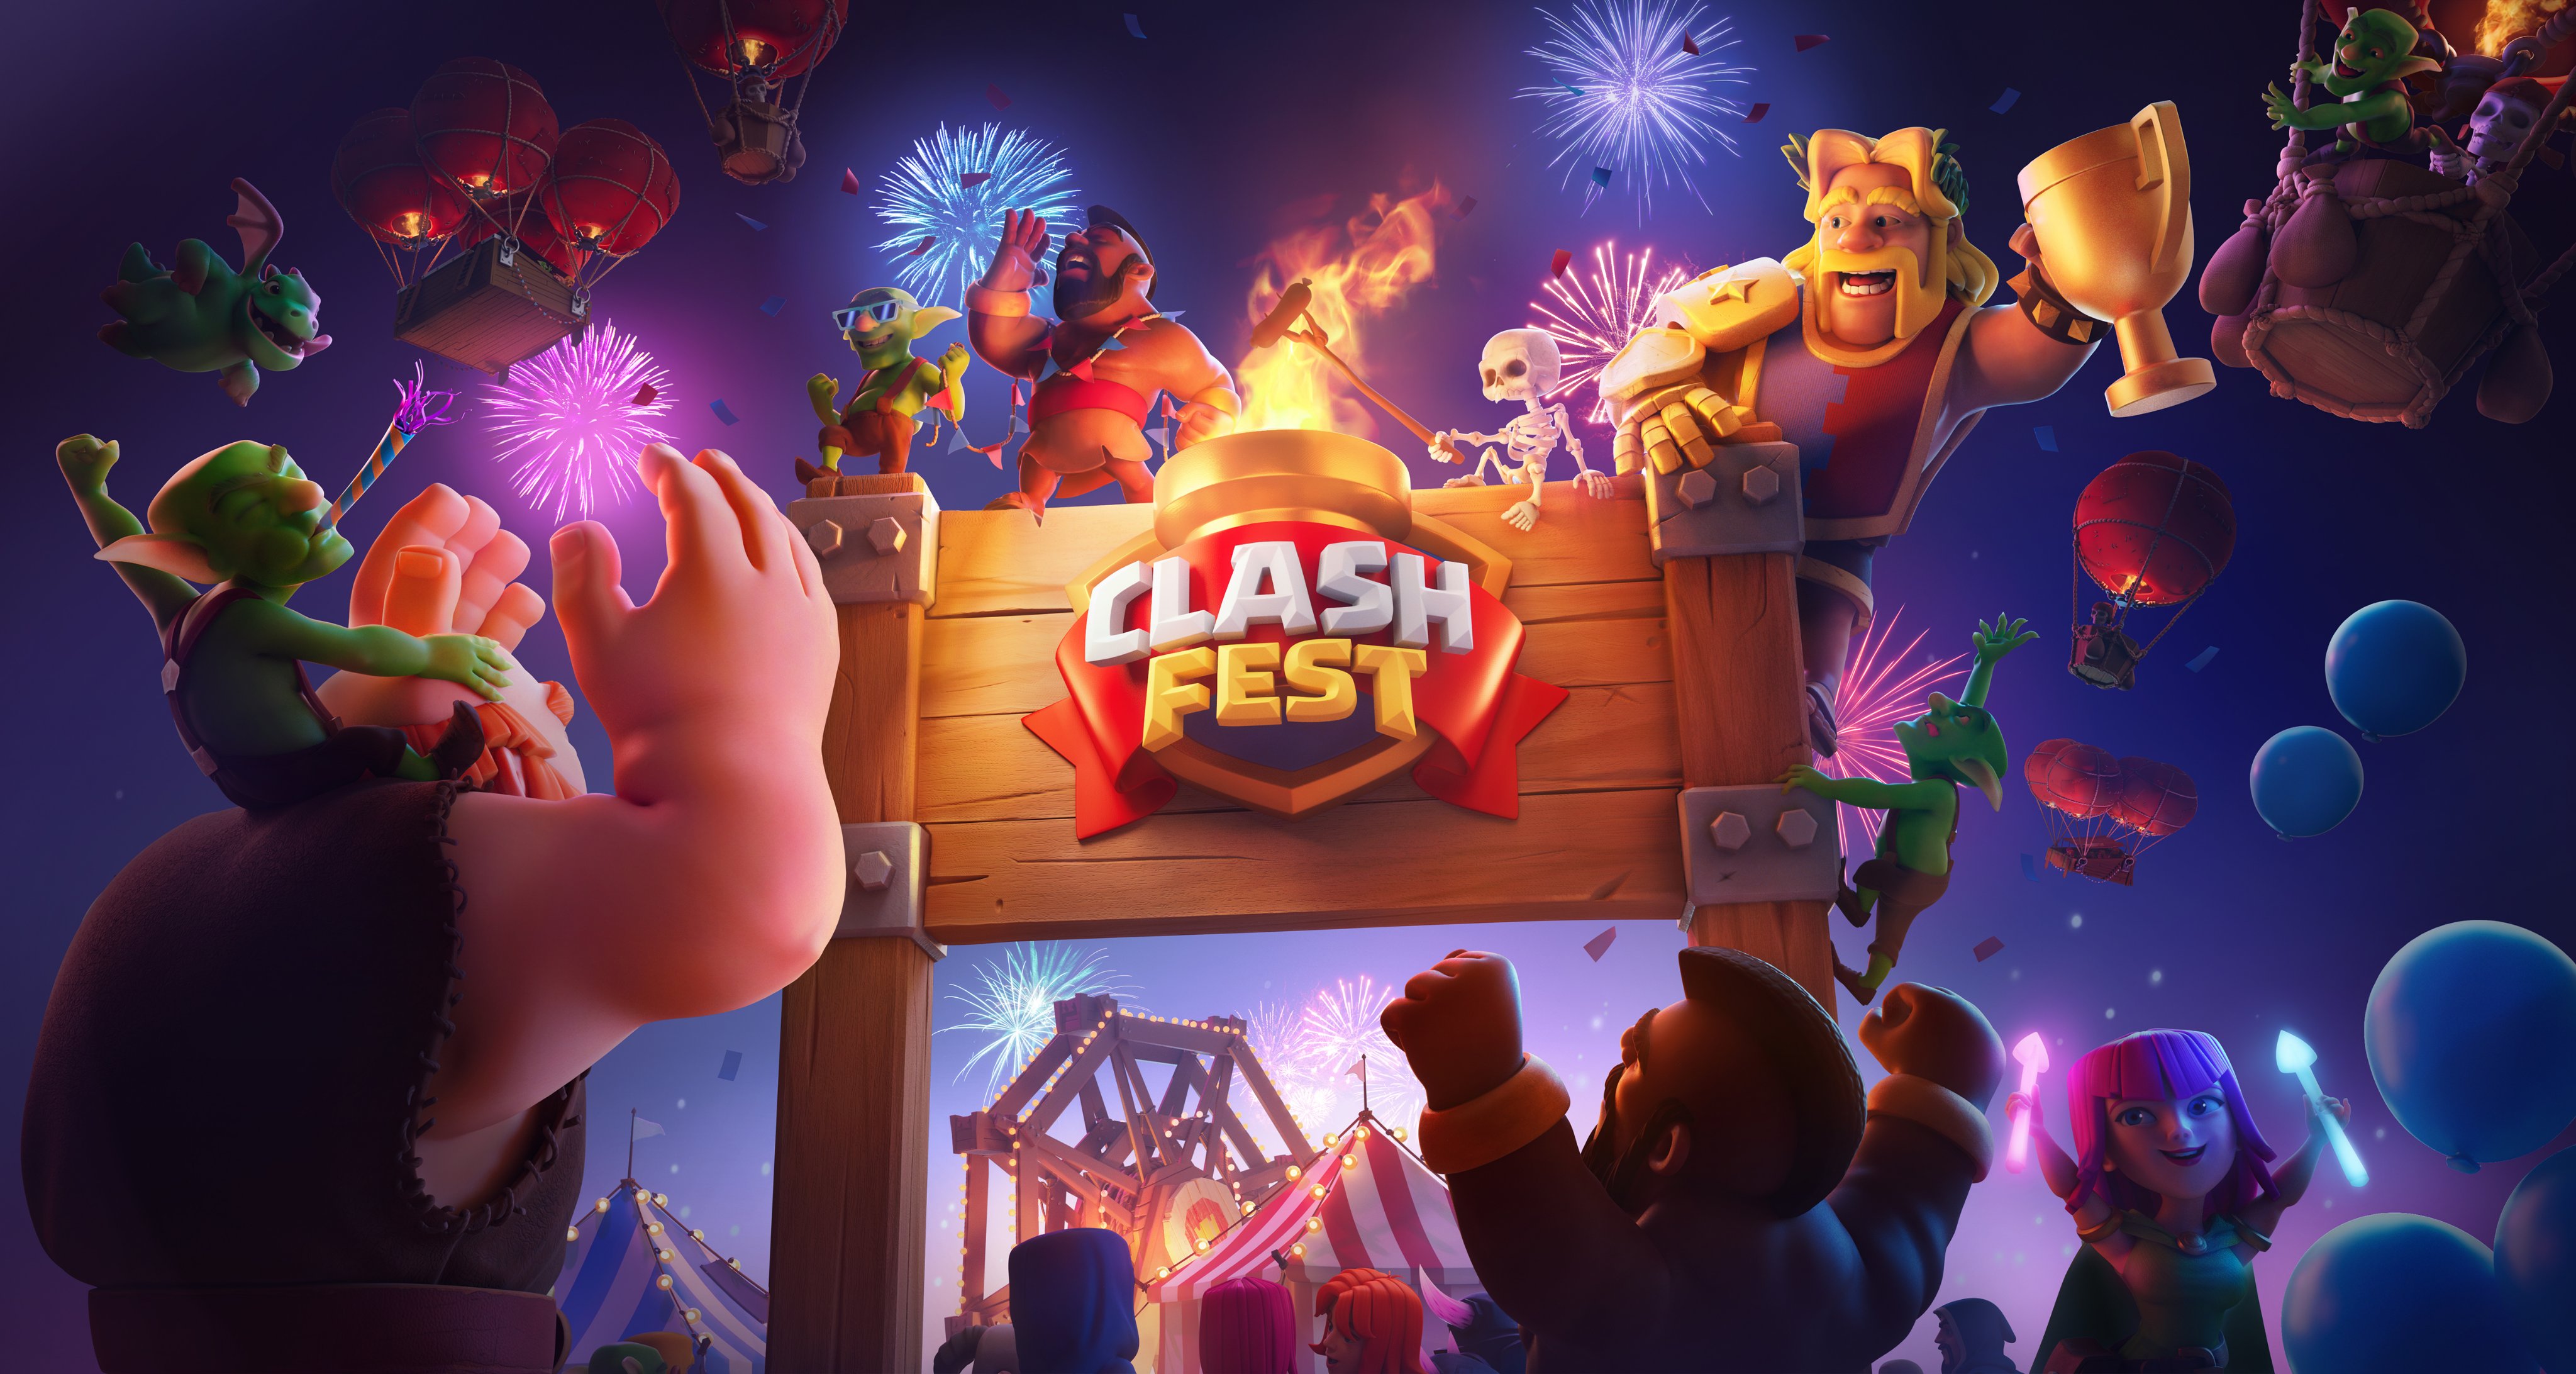 Celebrate Clash Fest in Clash of Clans and Clash Royale